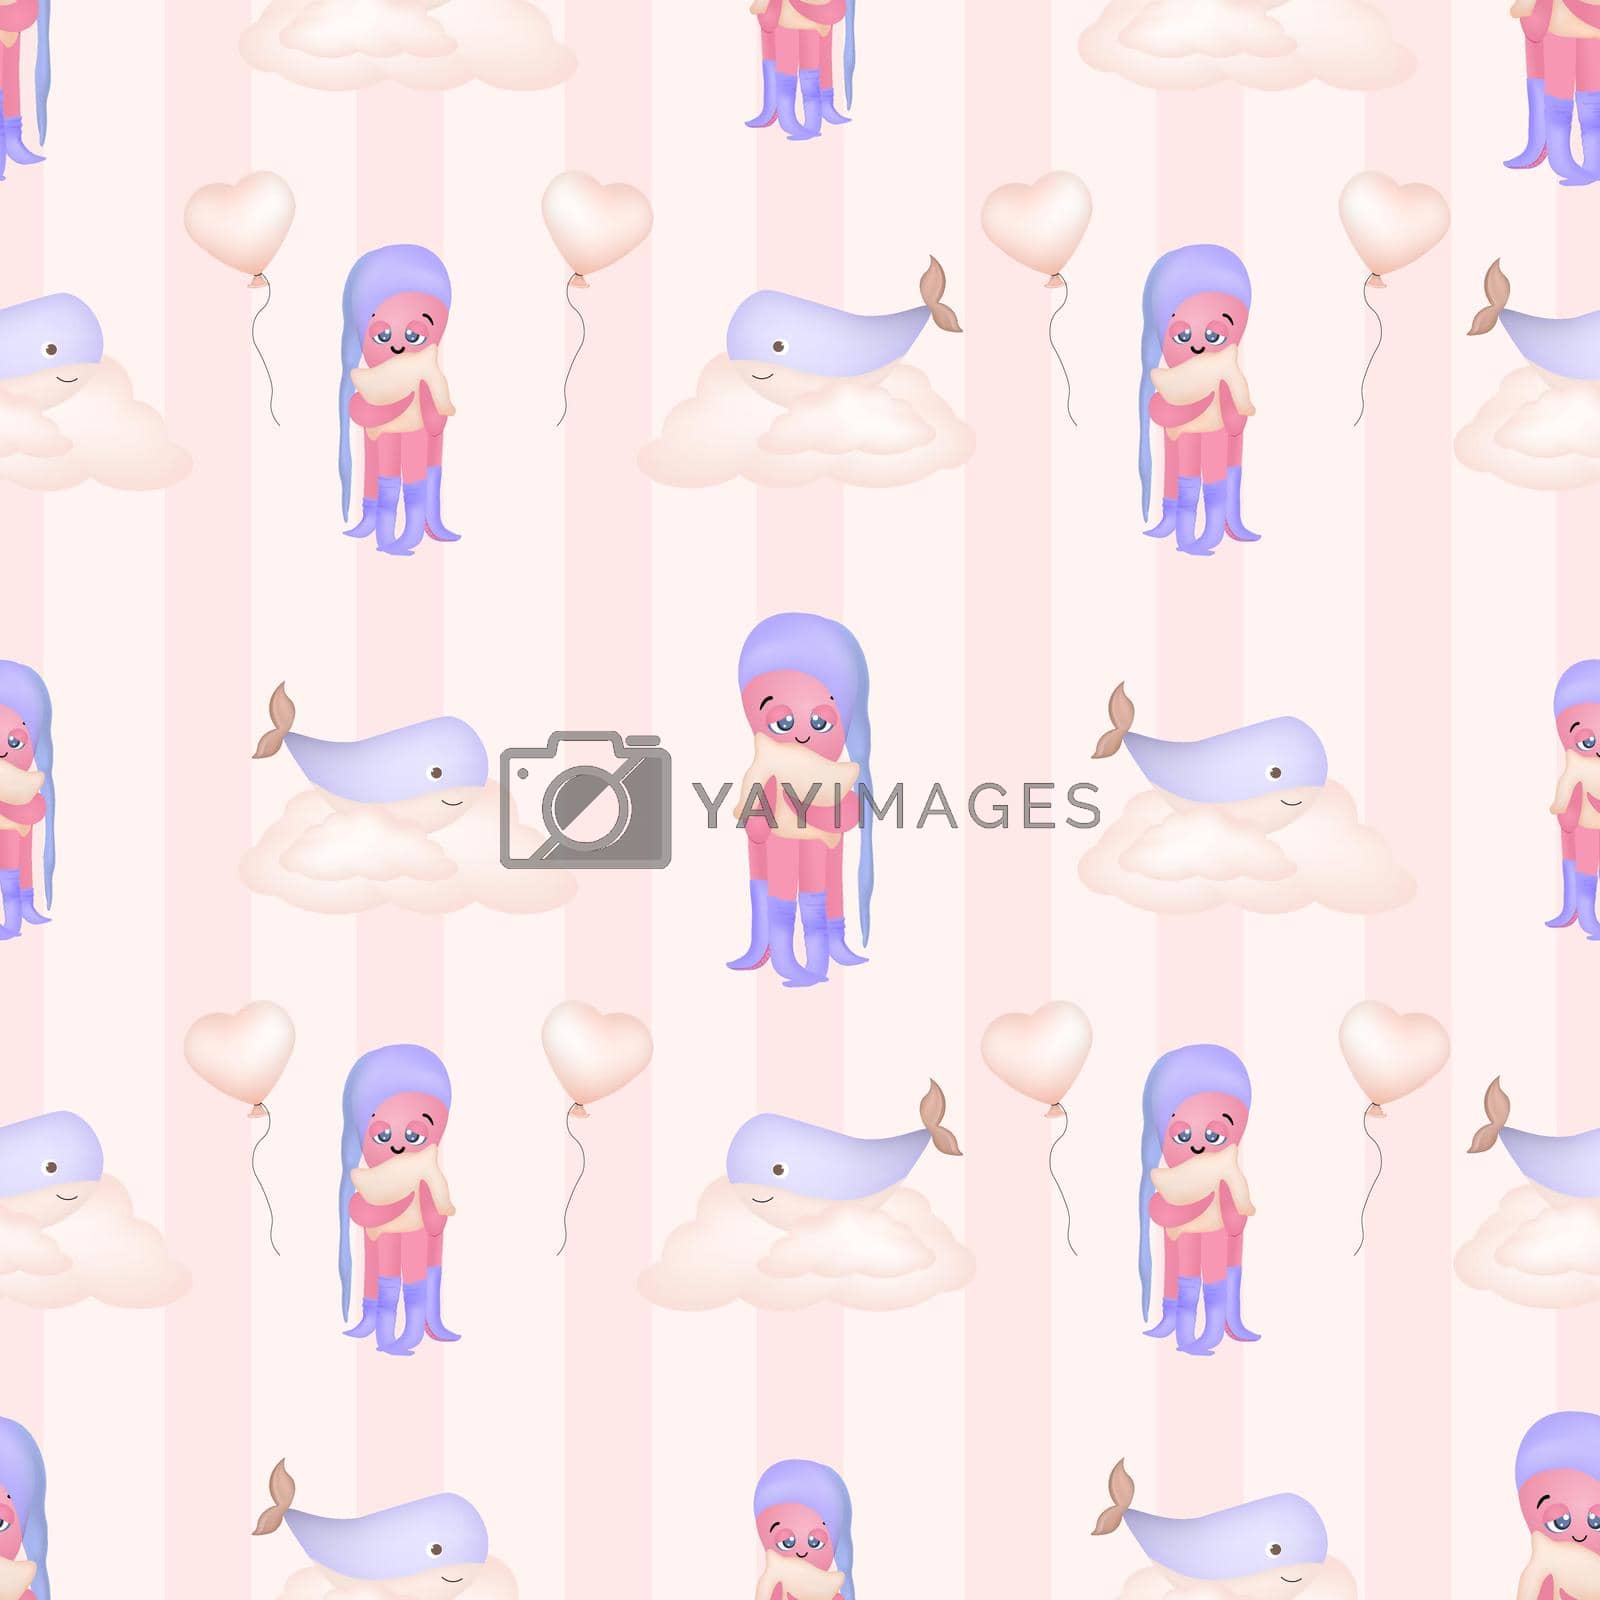 Royalty free image of Seamless pattern with octopuses. Cute children's octopus character. Children's textiles. Seamless ornament for babies by annatarankova